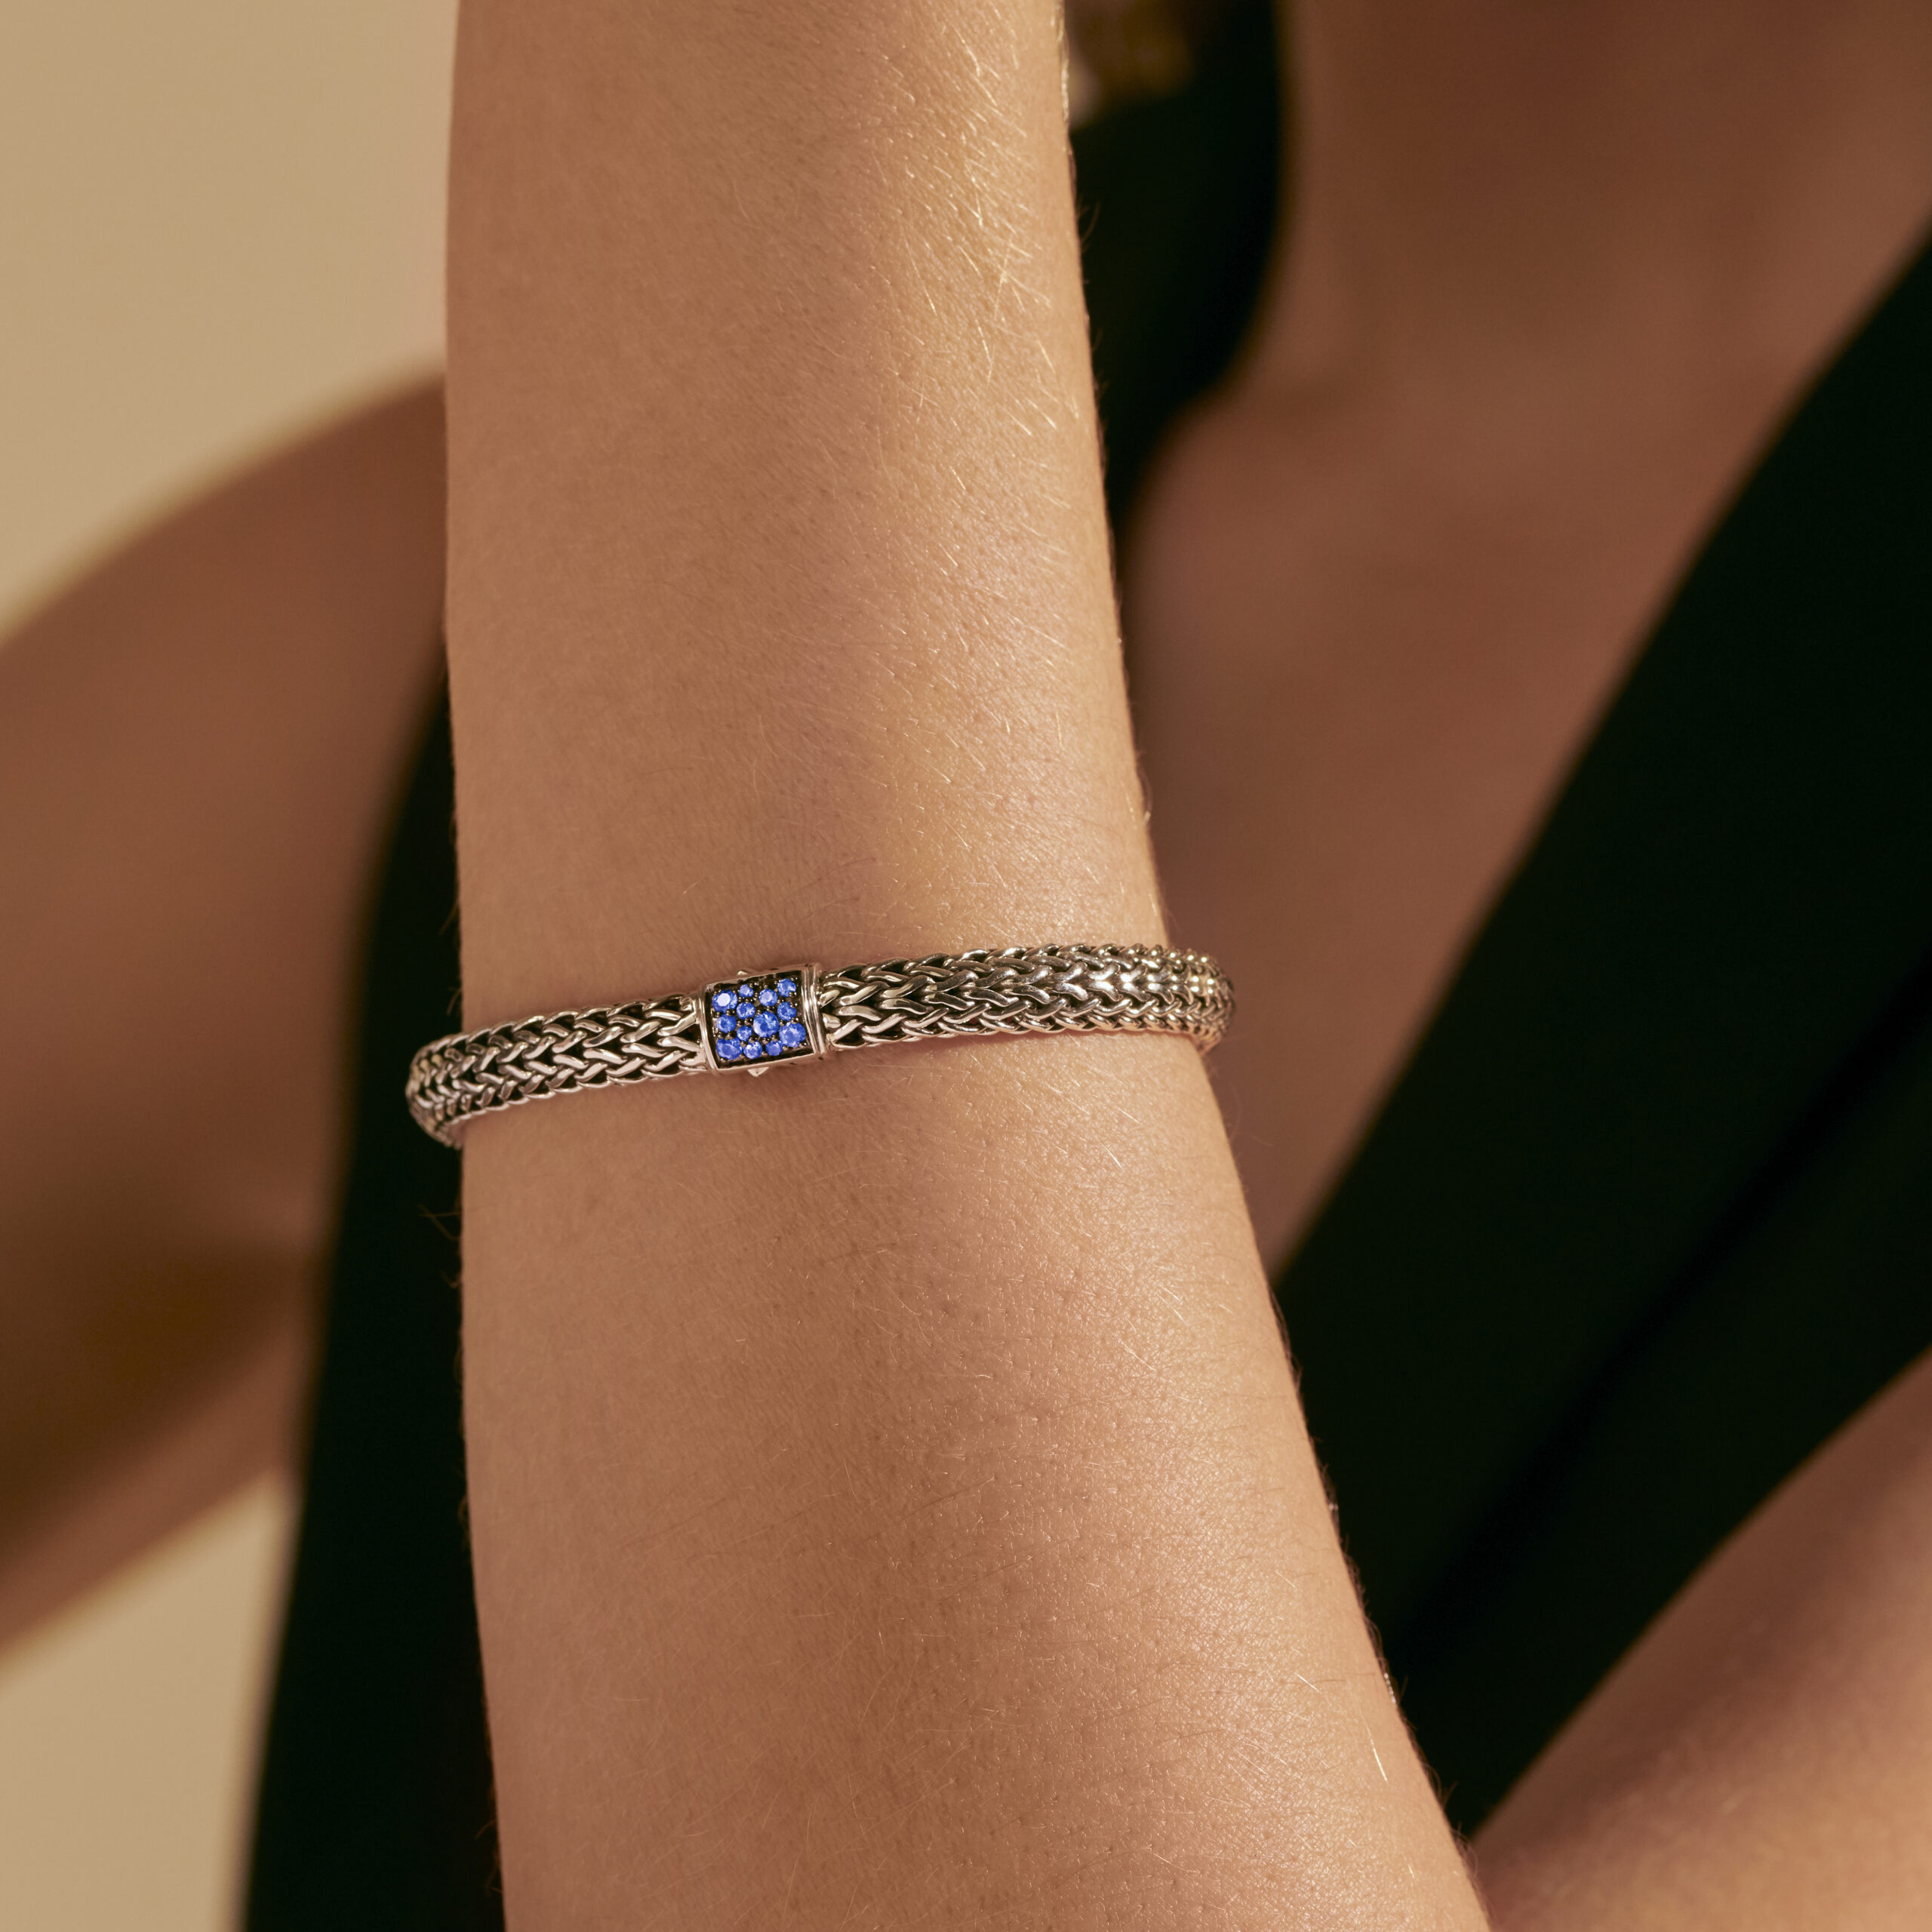 This bracelet by John Hardy is crafted from sterling silver and features black and blue sapphires in the clasp.